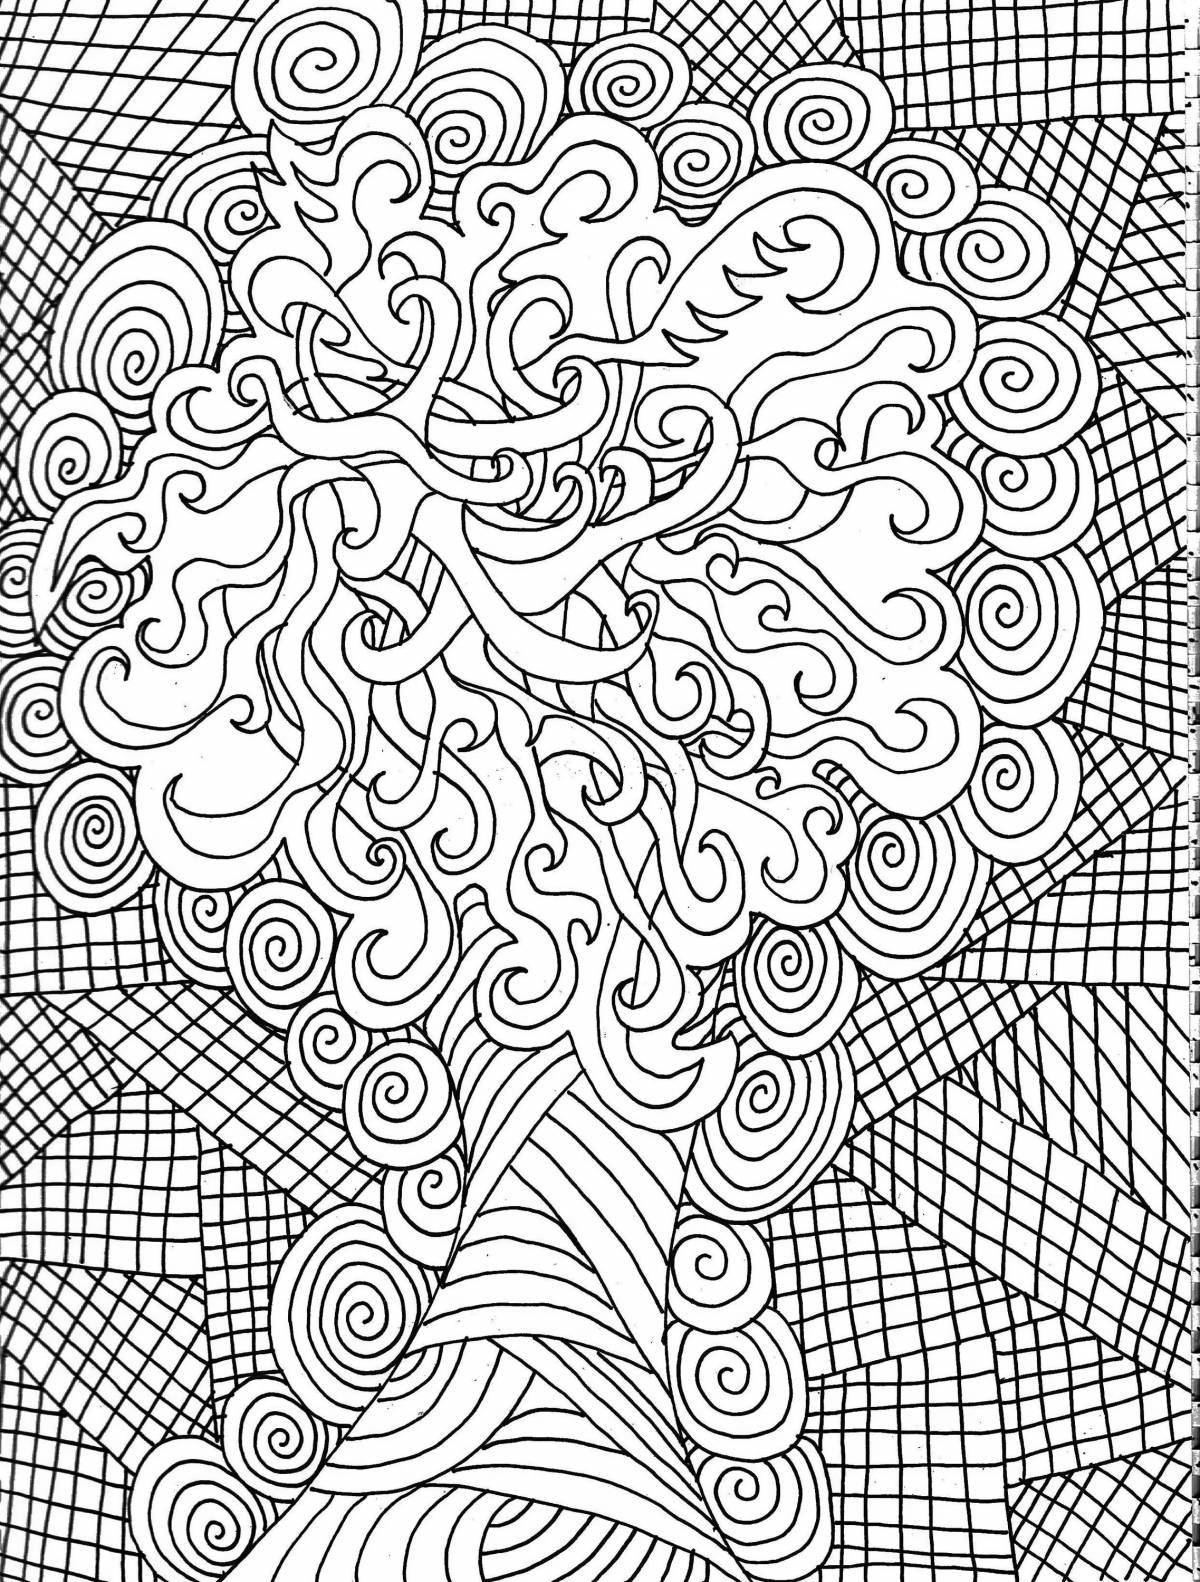 Coloring intricate patterns - great